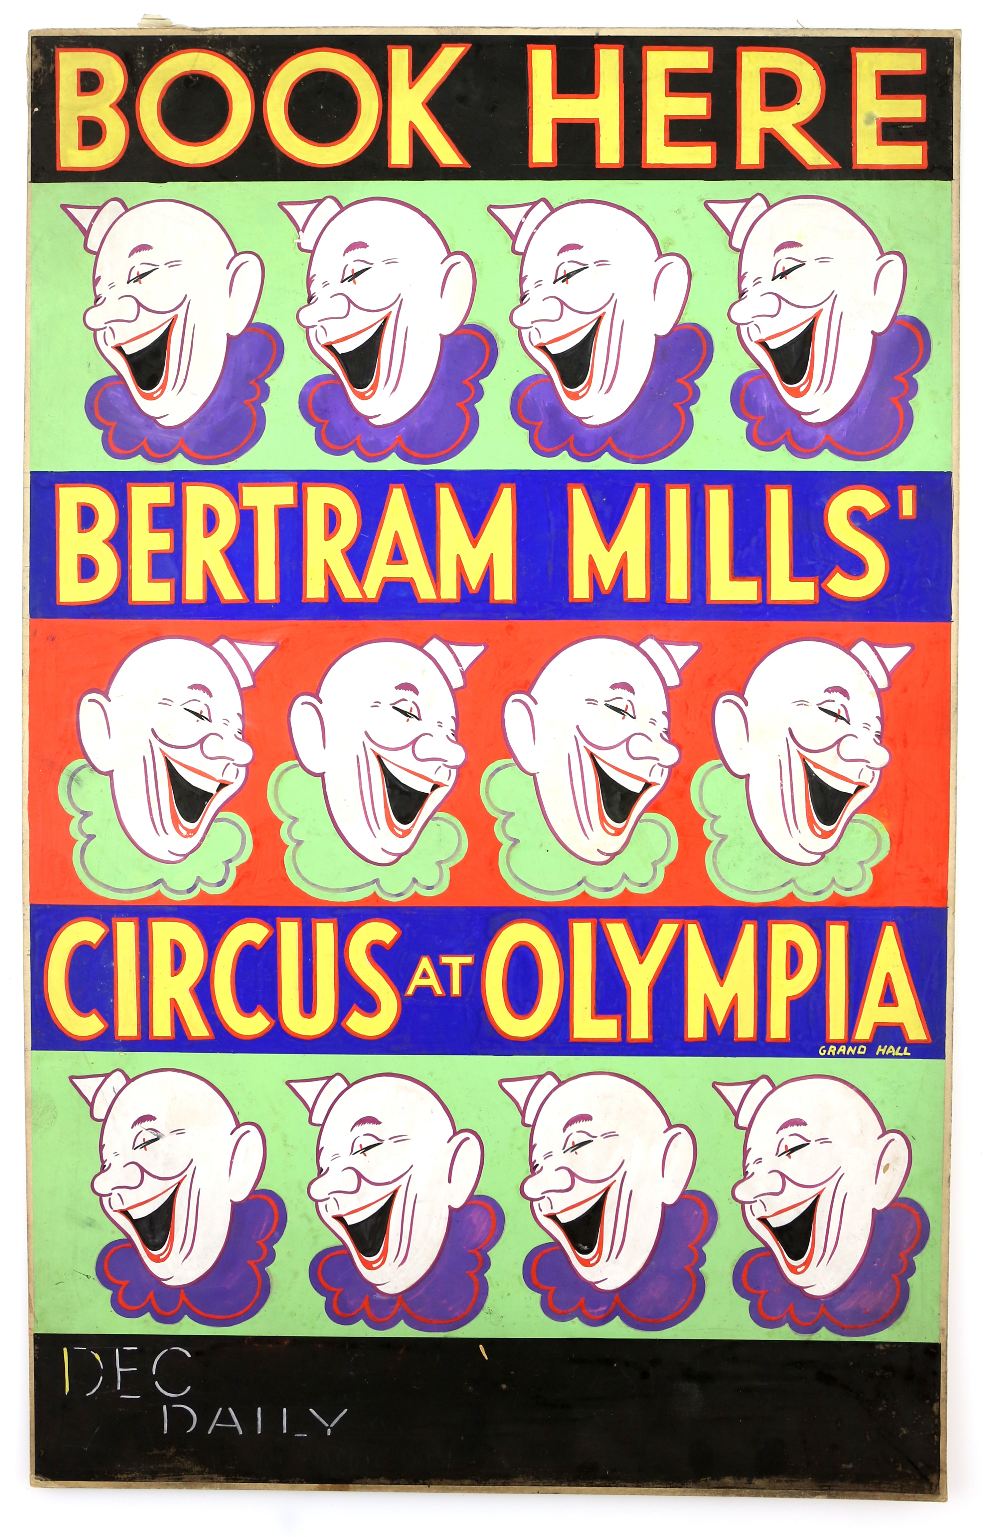 Bertram Mills Circus at Olympia - 'Book Here', featuring three rows of clowns, original hand painted